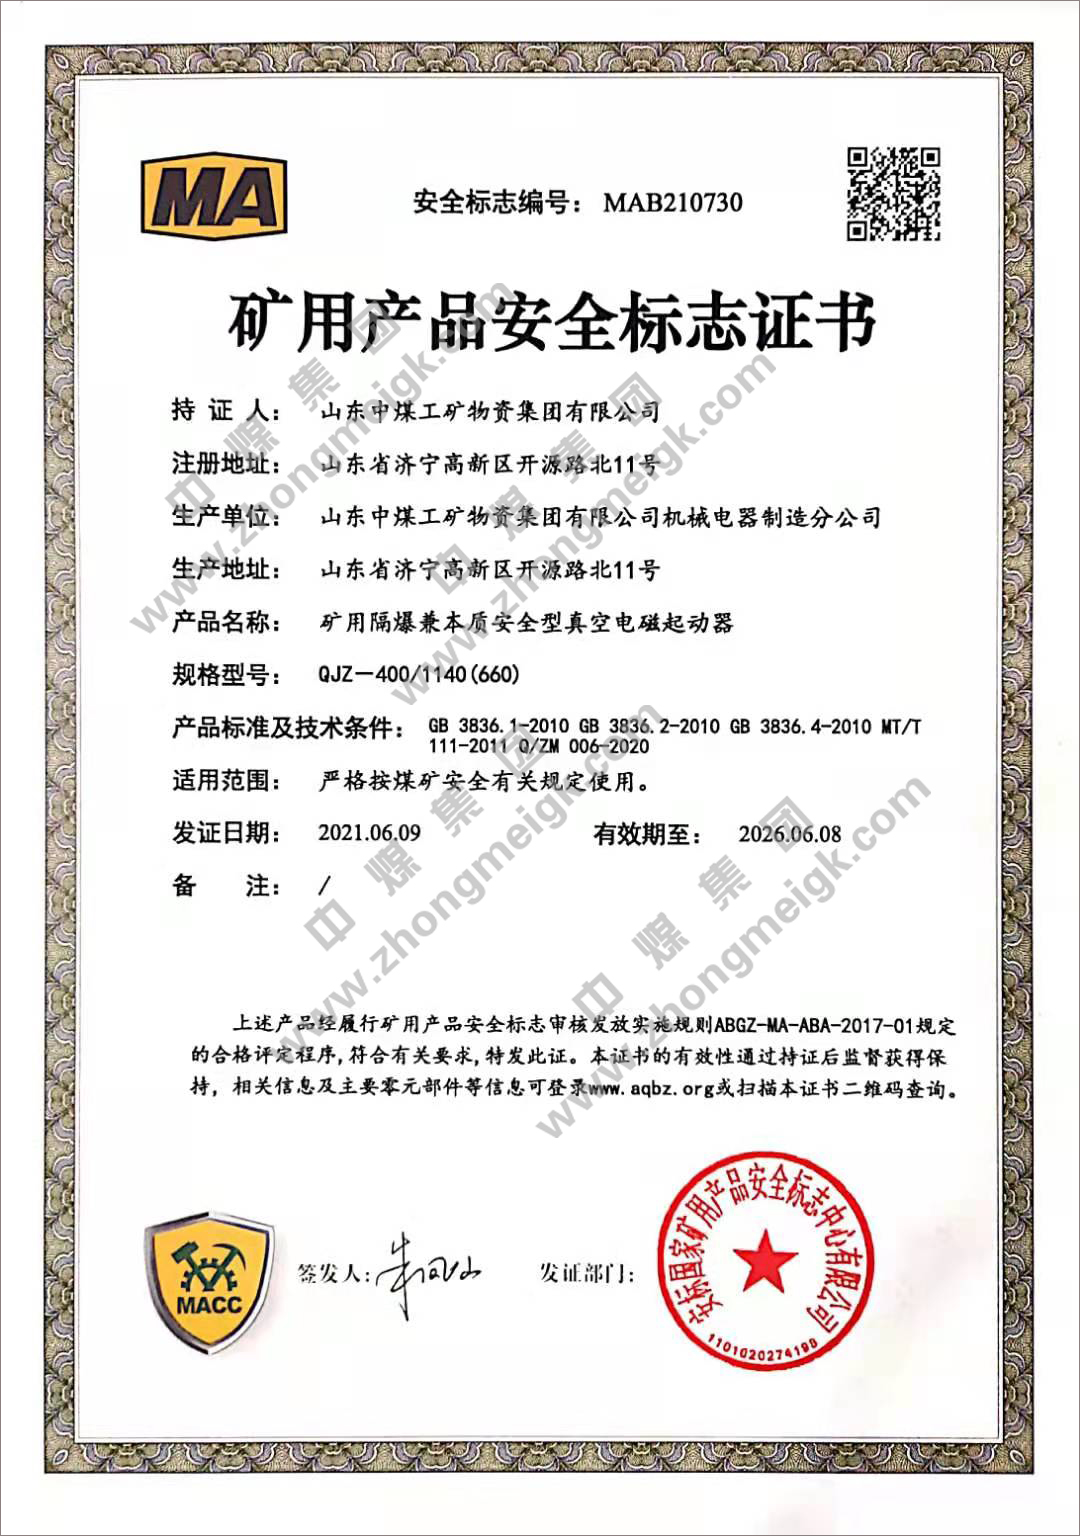 Congratulations To China Coal Group For Adding 7 New National Mining Product Safety Mark Certificates